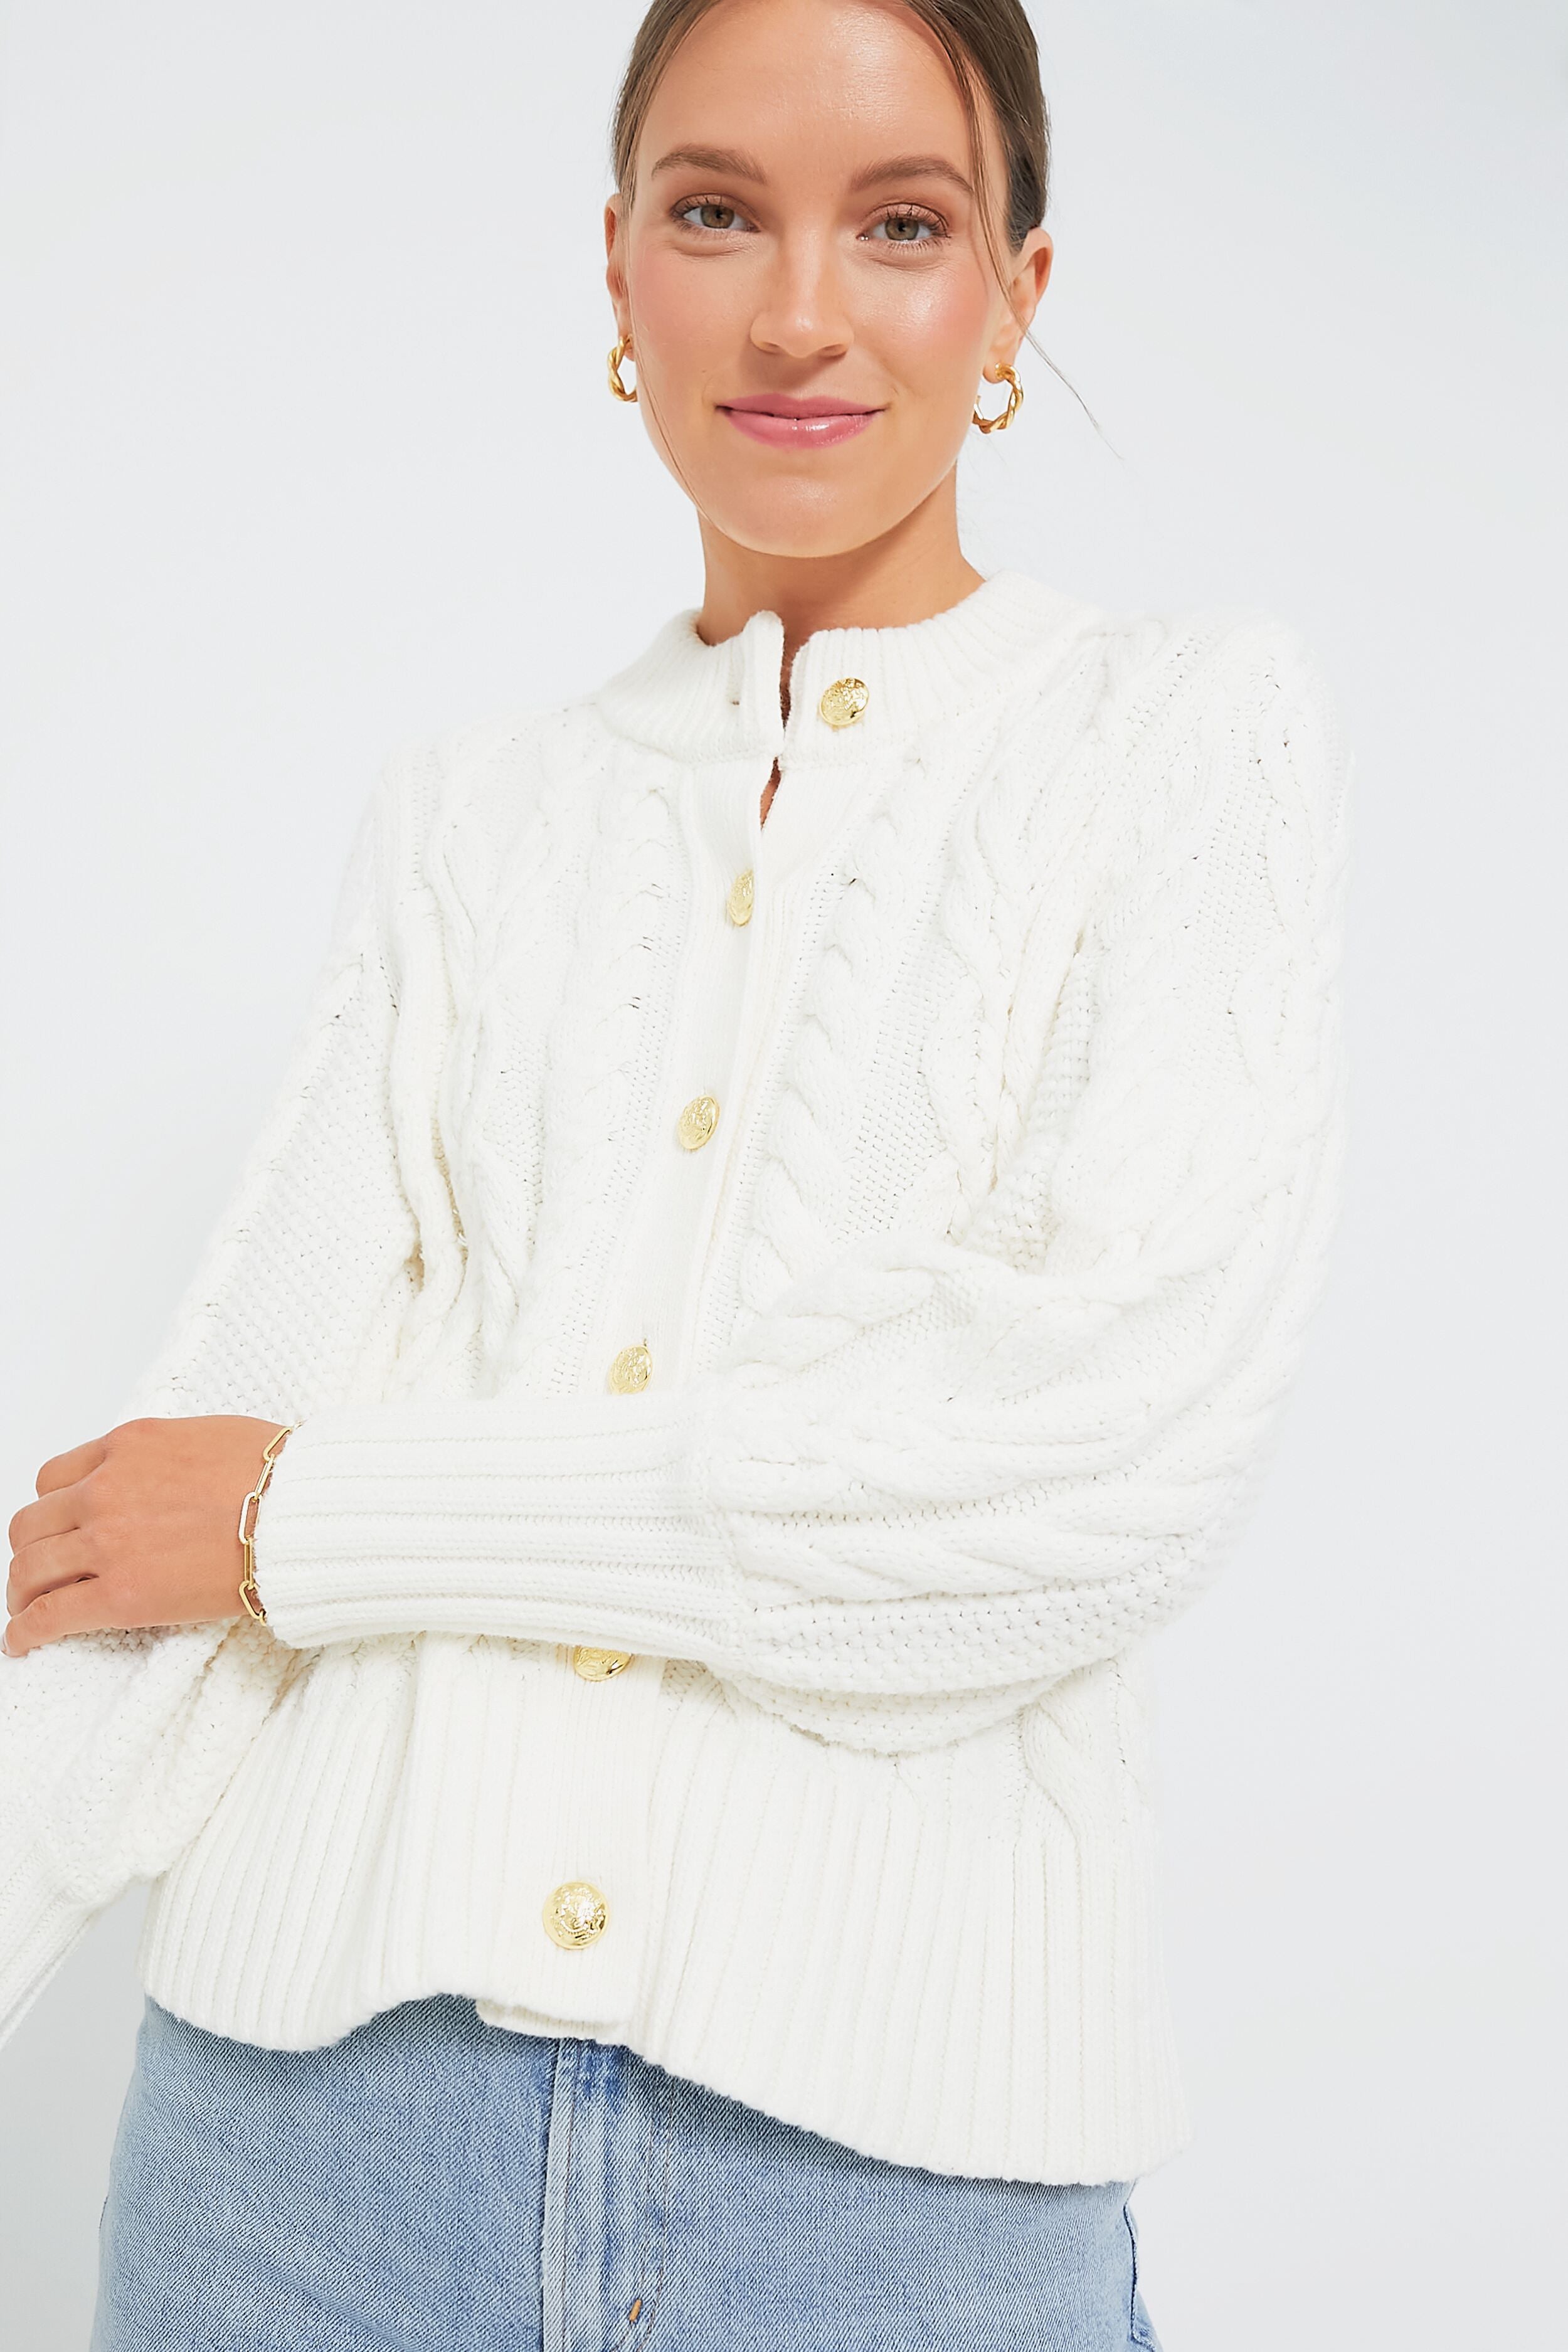 Chanel 100% Cotton Cardigan Sweaters for Women